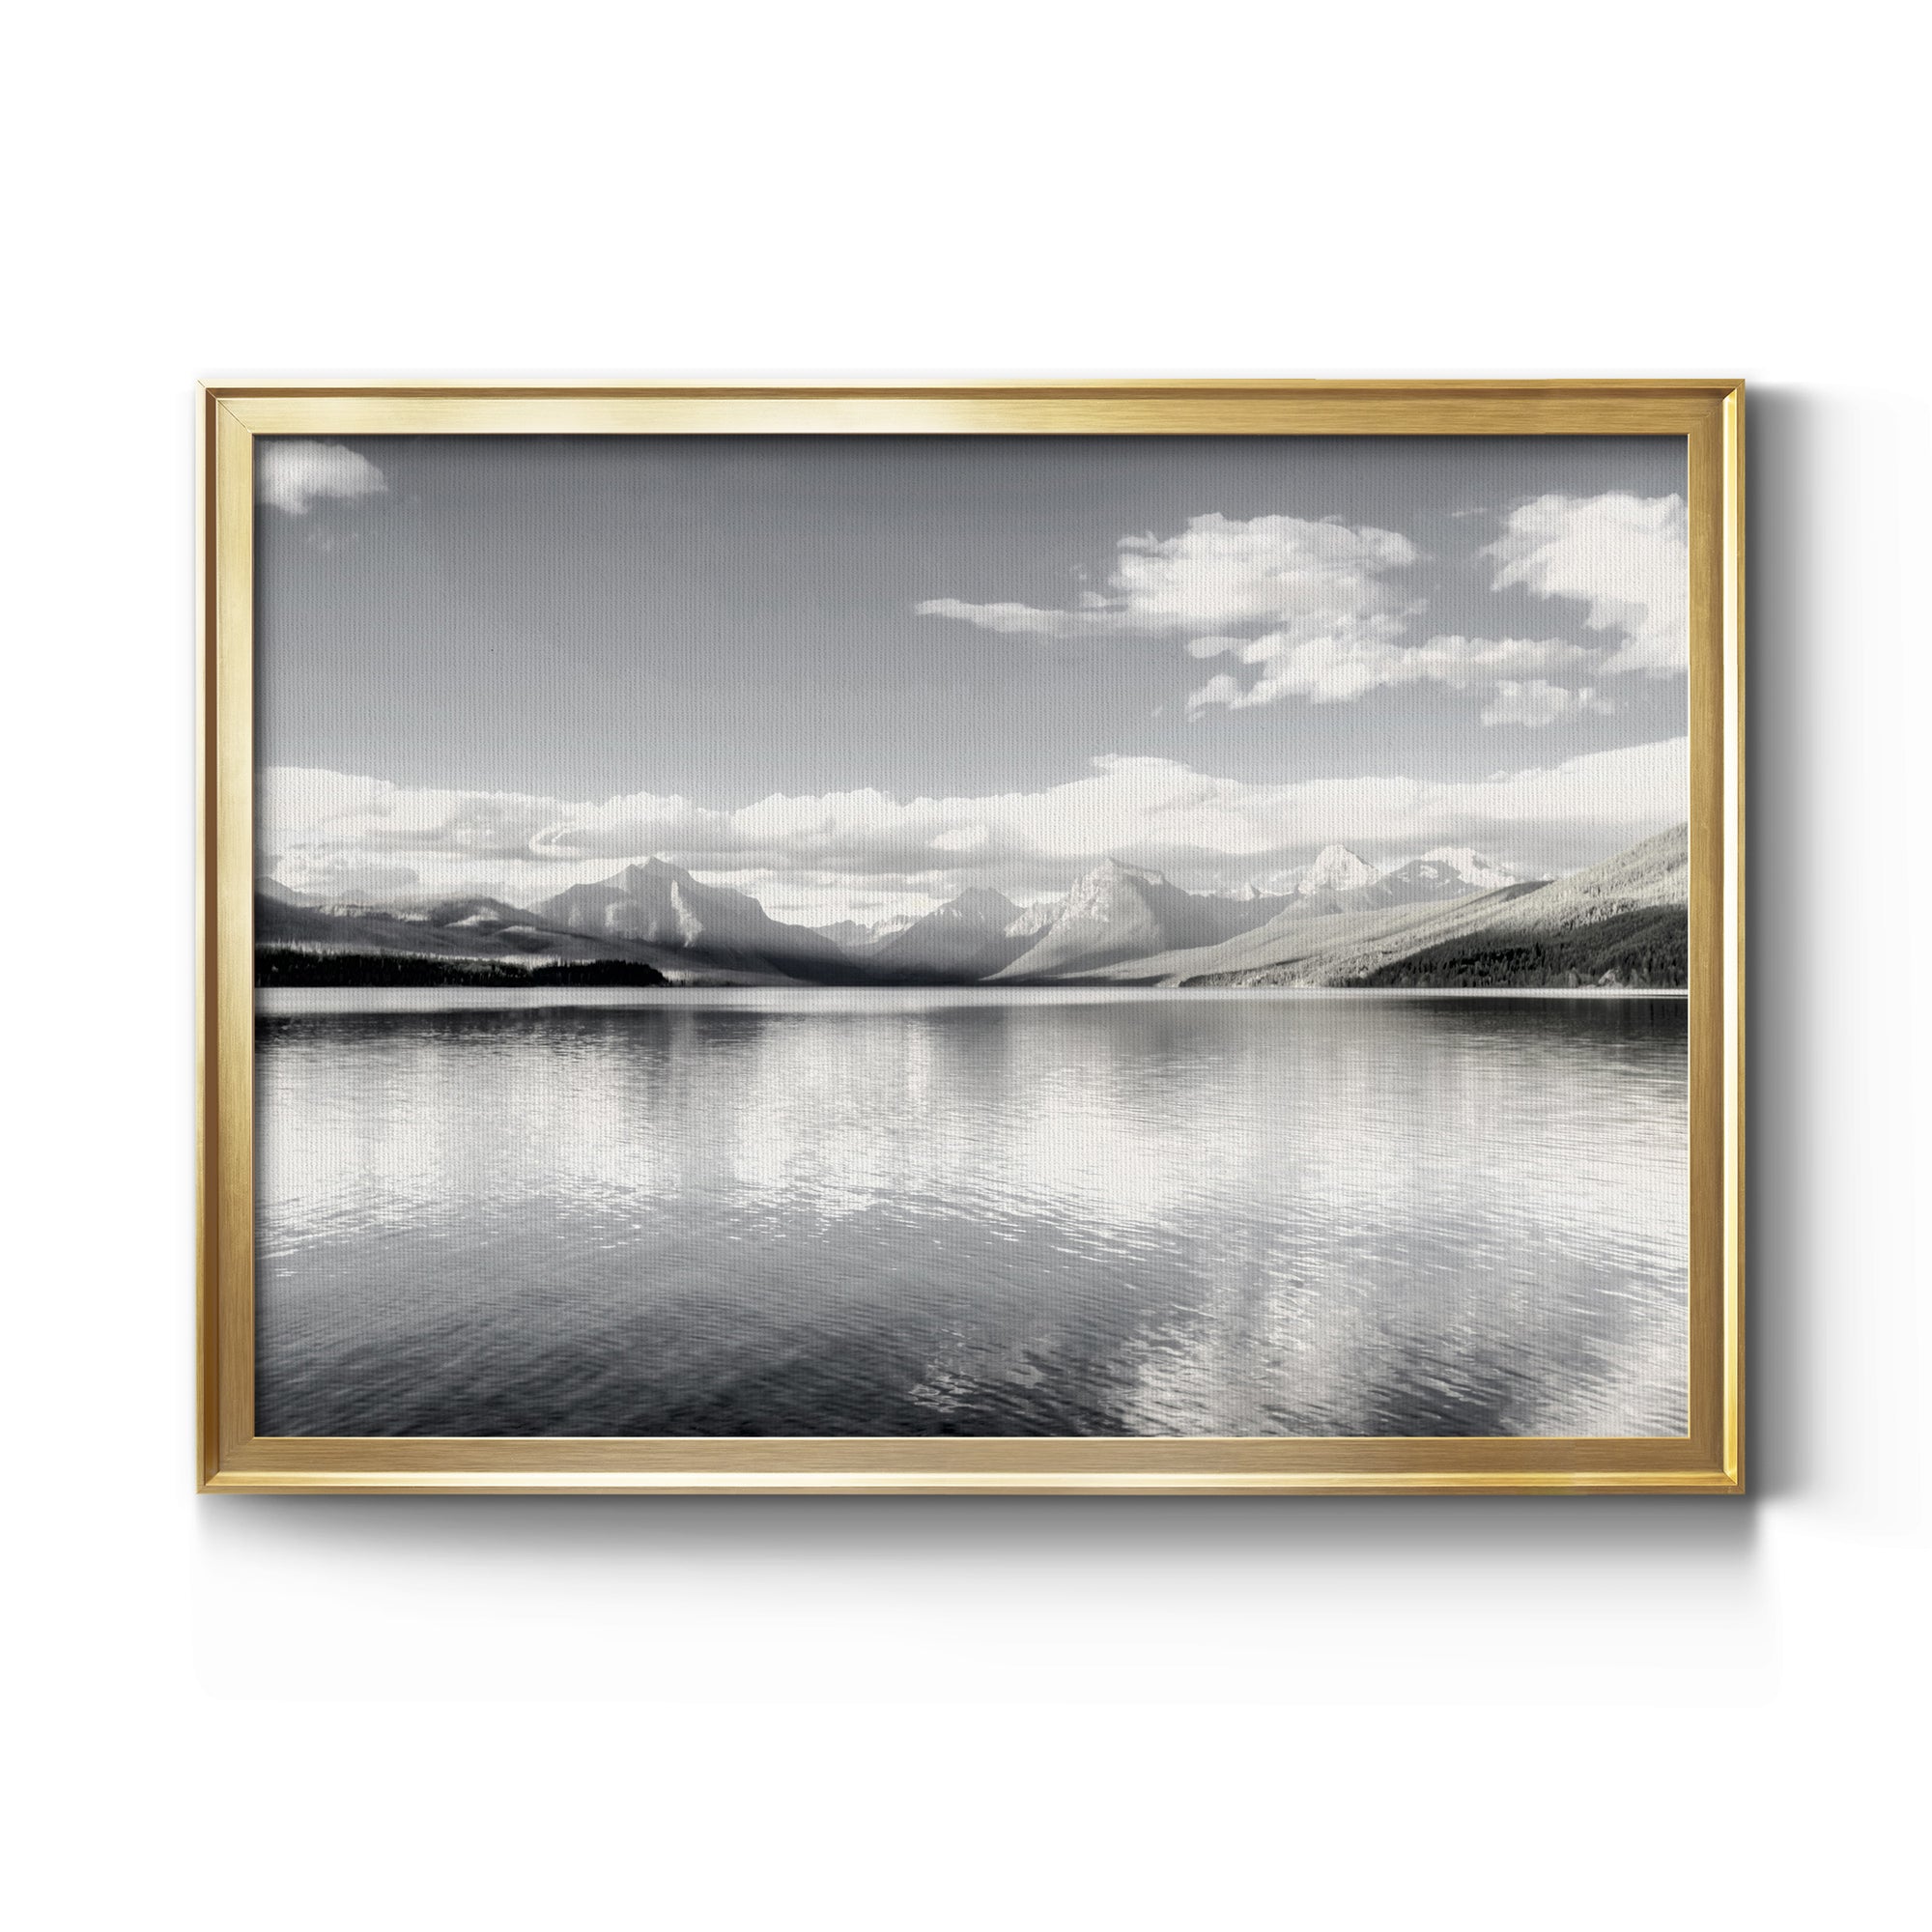 Crystal Lake Premium Classic Framed Canvas - Ready to Hang